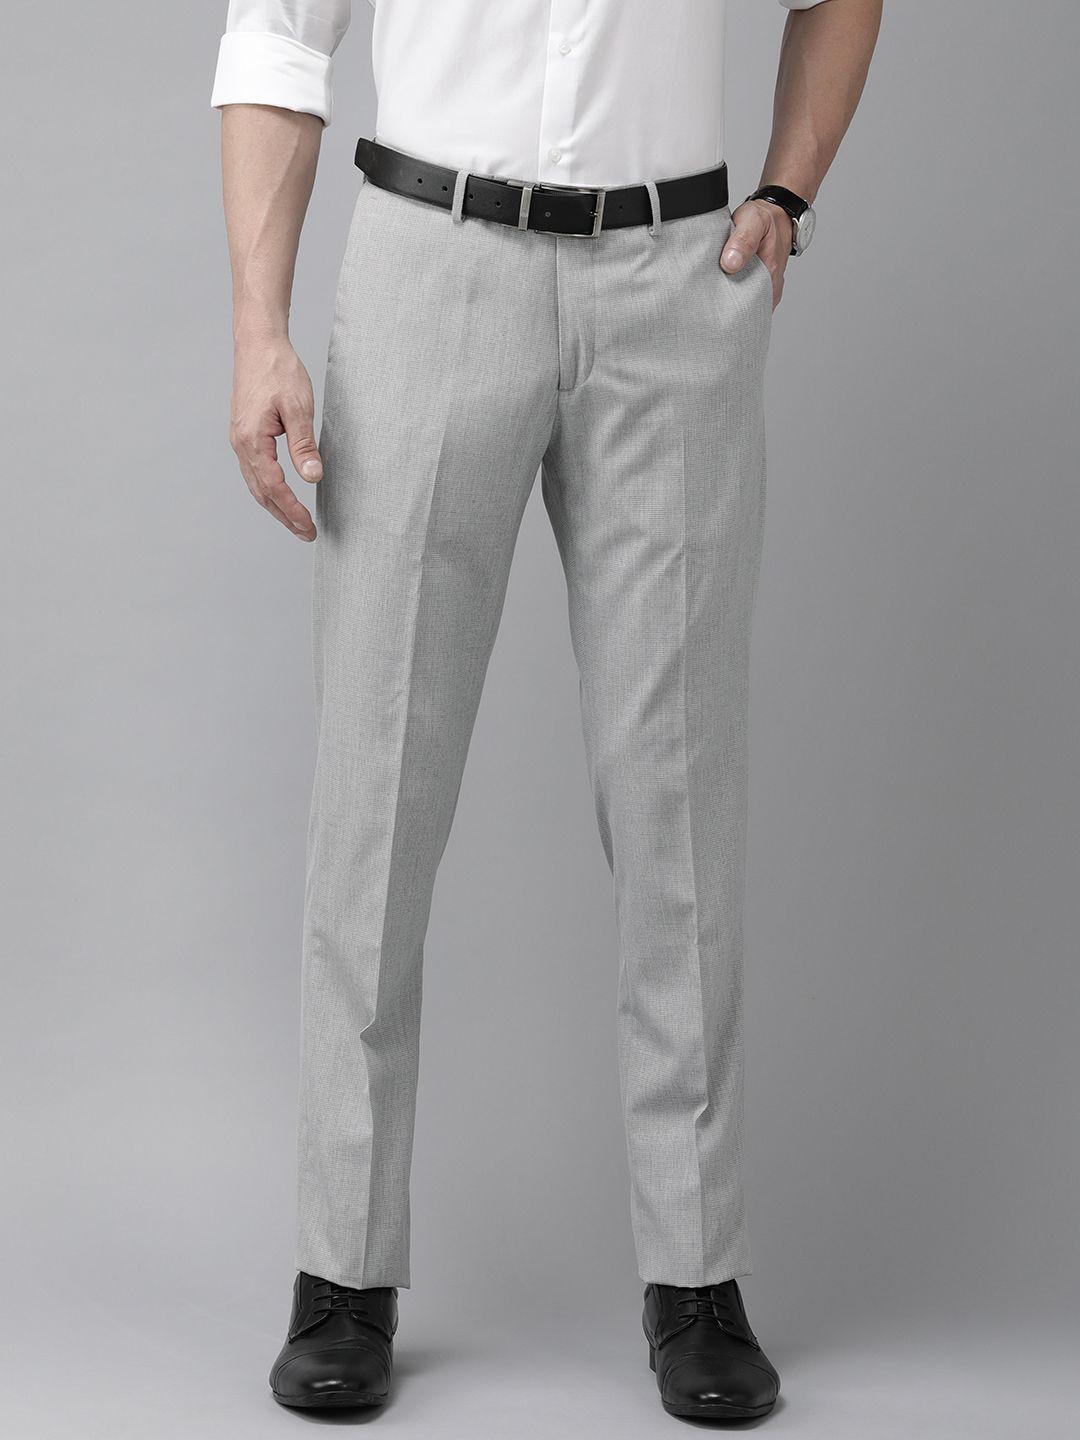 arrow men grey checked tailored formal trousers